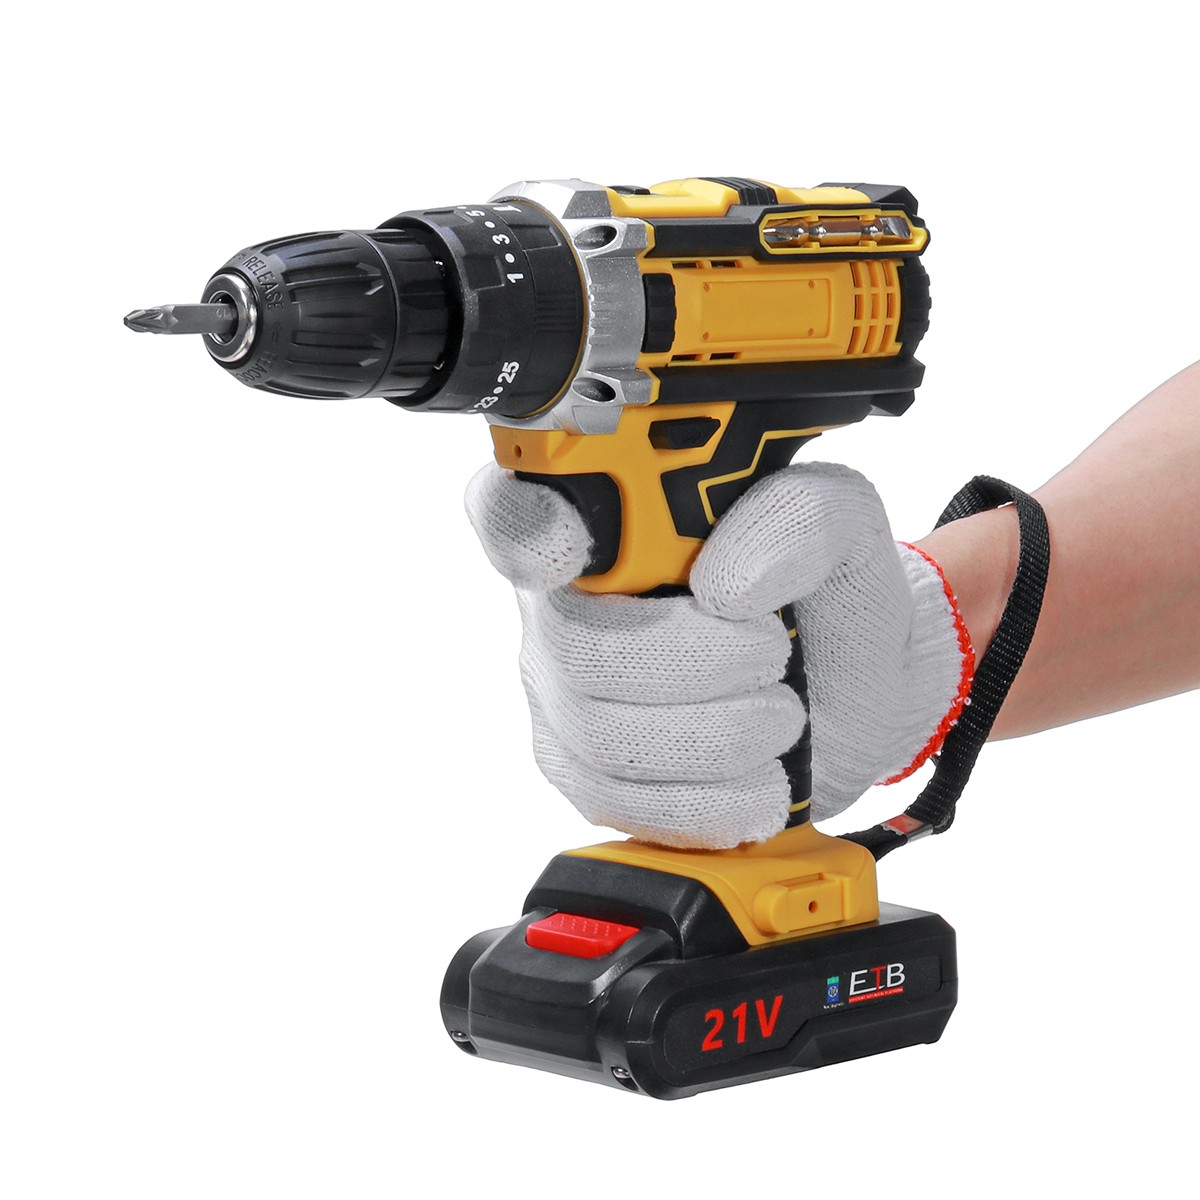 18500mAh-10mm-Cordless-Impact-Drill-Rechargeable-2-Speeds-LED-Electric-Drill-W-12pcs-Battery-1910512-6